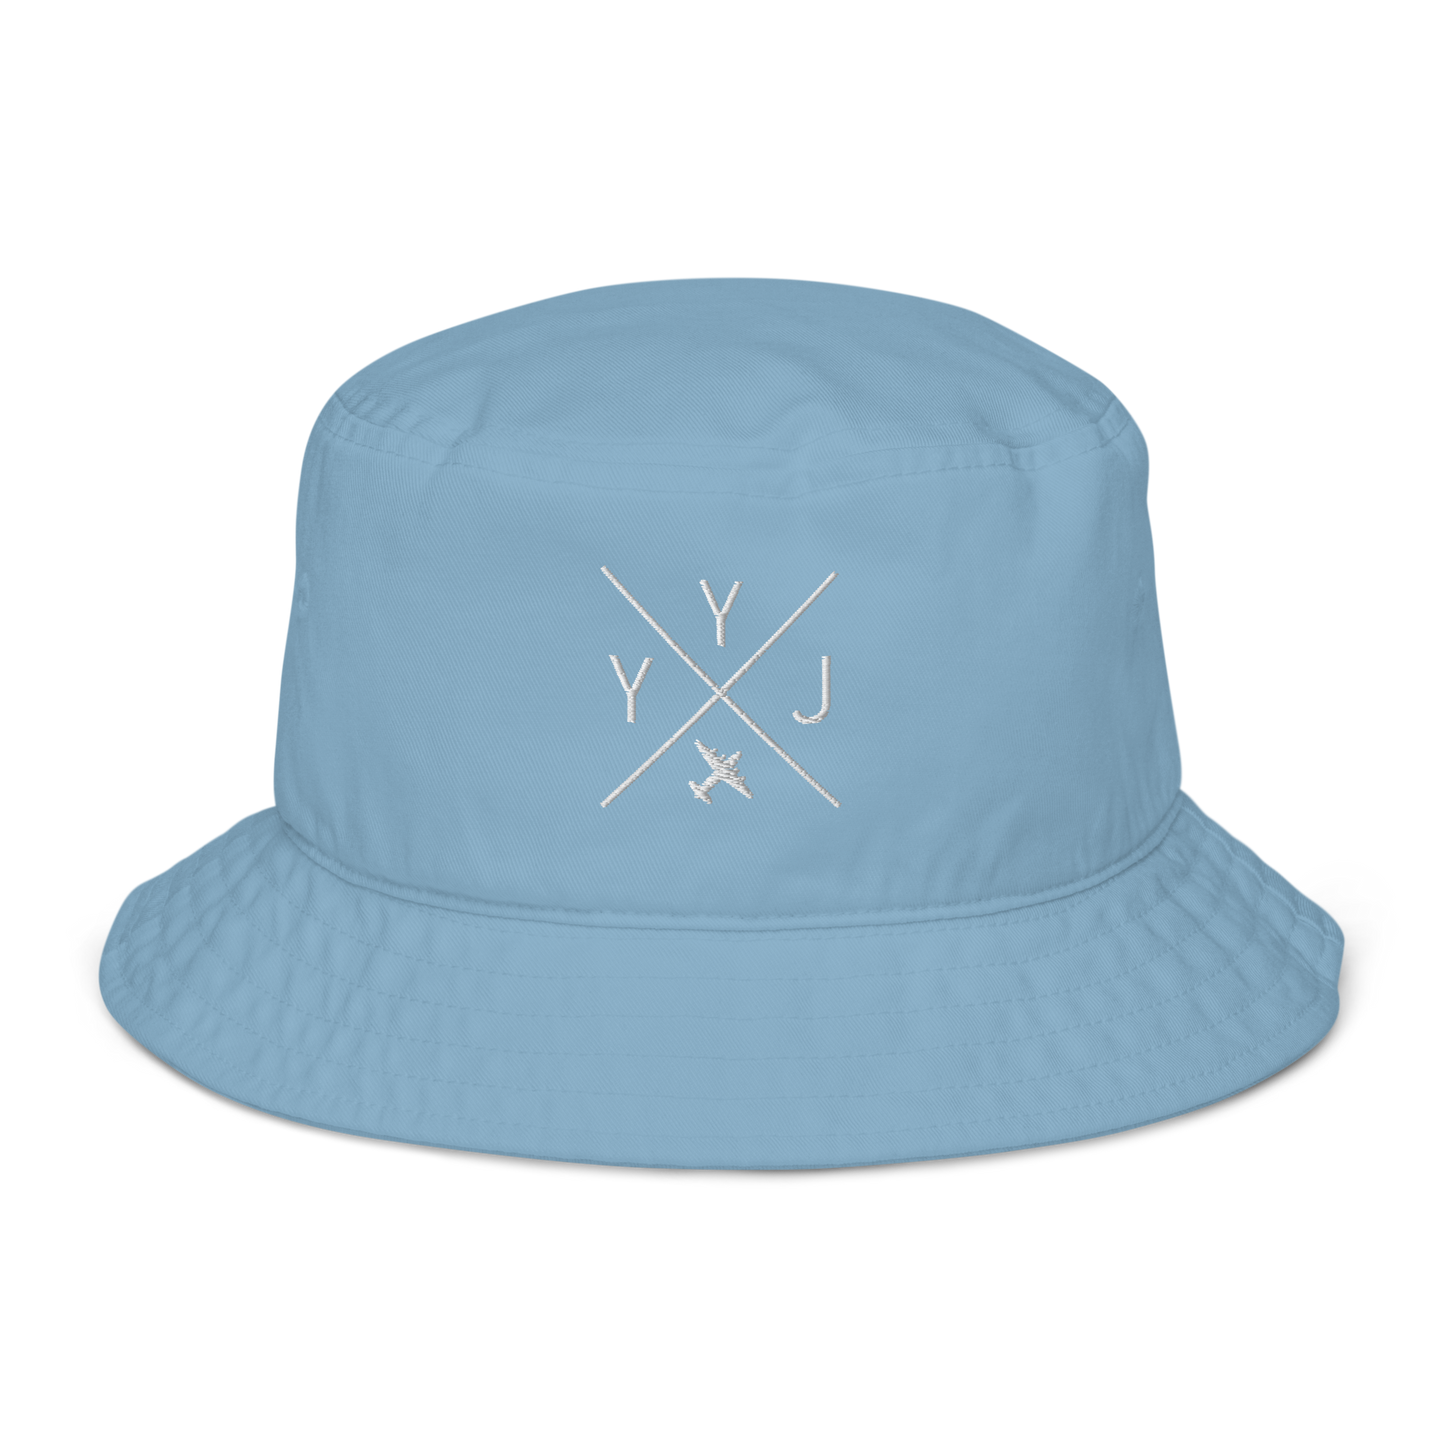 YHM Designs - YYJ Victoria Organic Cotton Bucket Hat - Crossed-X Design with Airport Code and Vintage Propliner - White Embroidery - Image 07